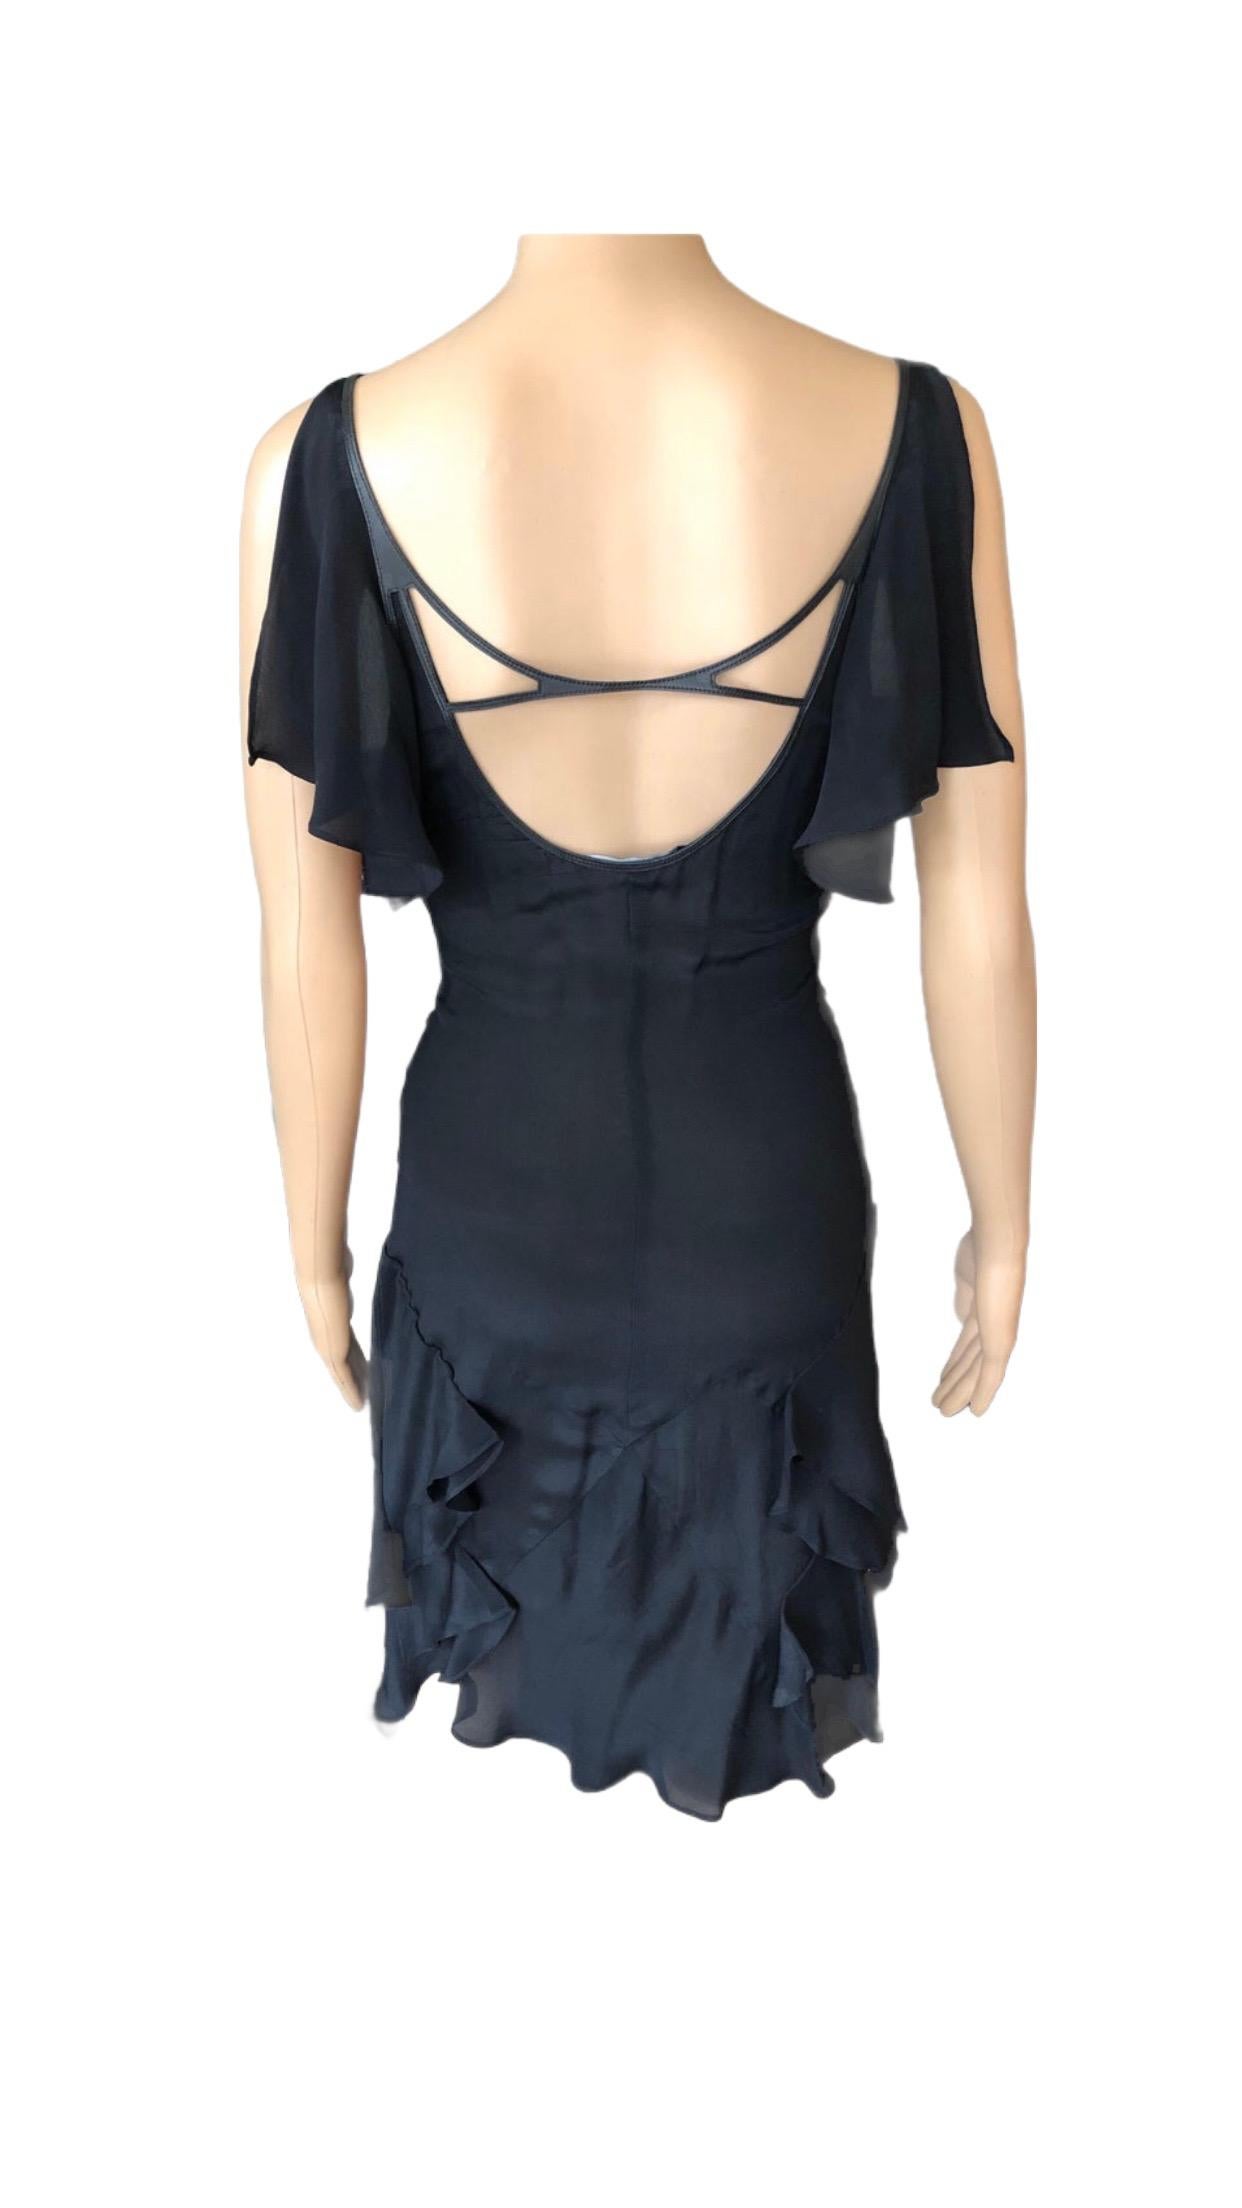 Gucci by Tom Ford S/S 2004 Cutout Plunged Neckline Black Dress For Sale 7